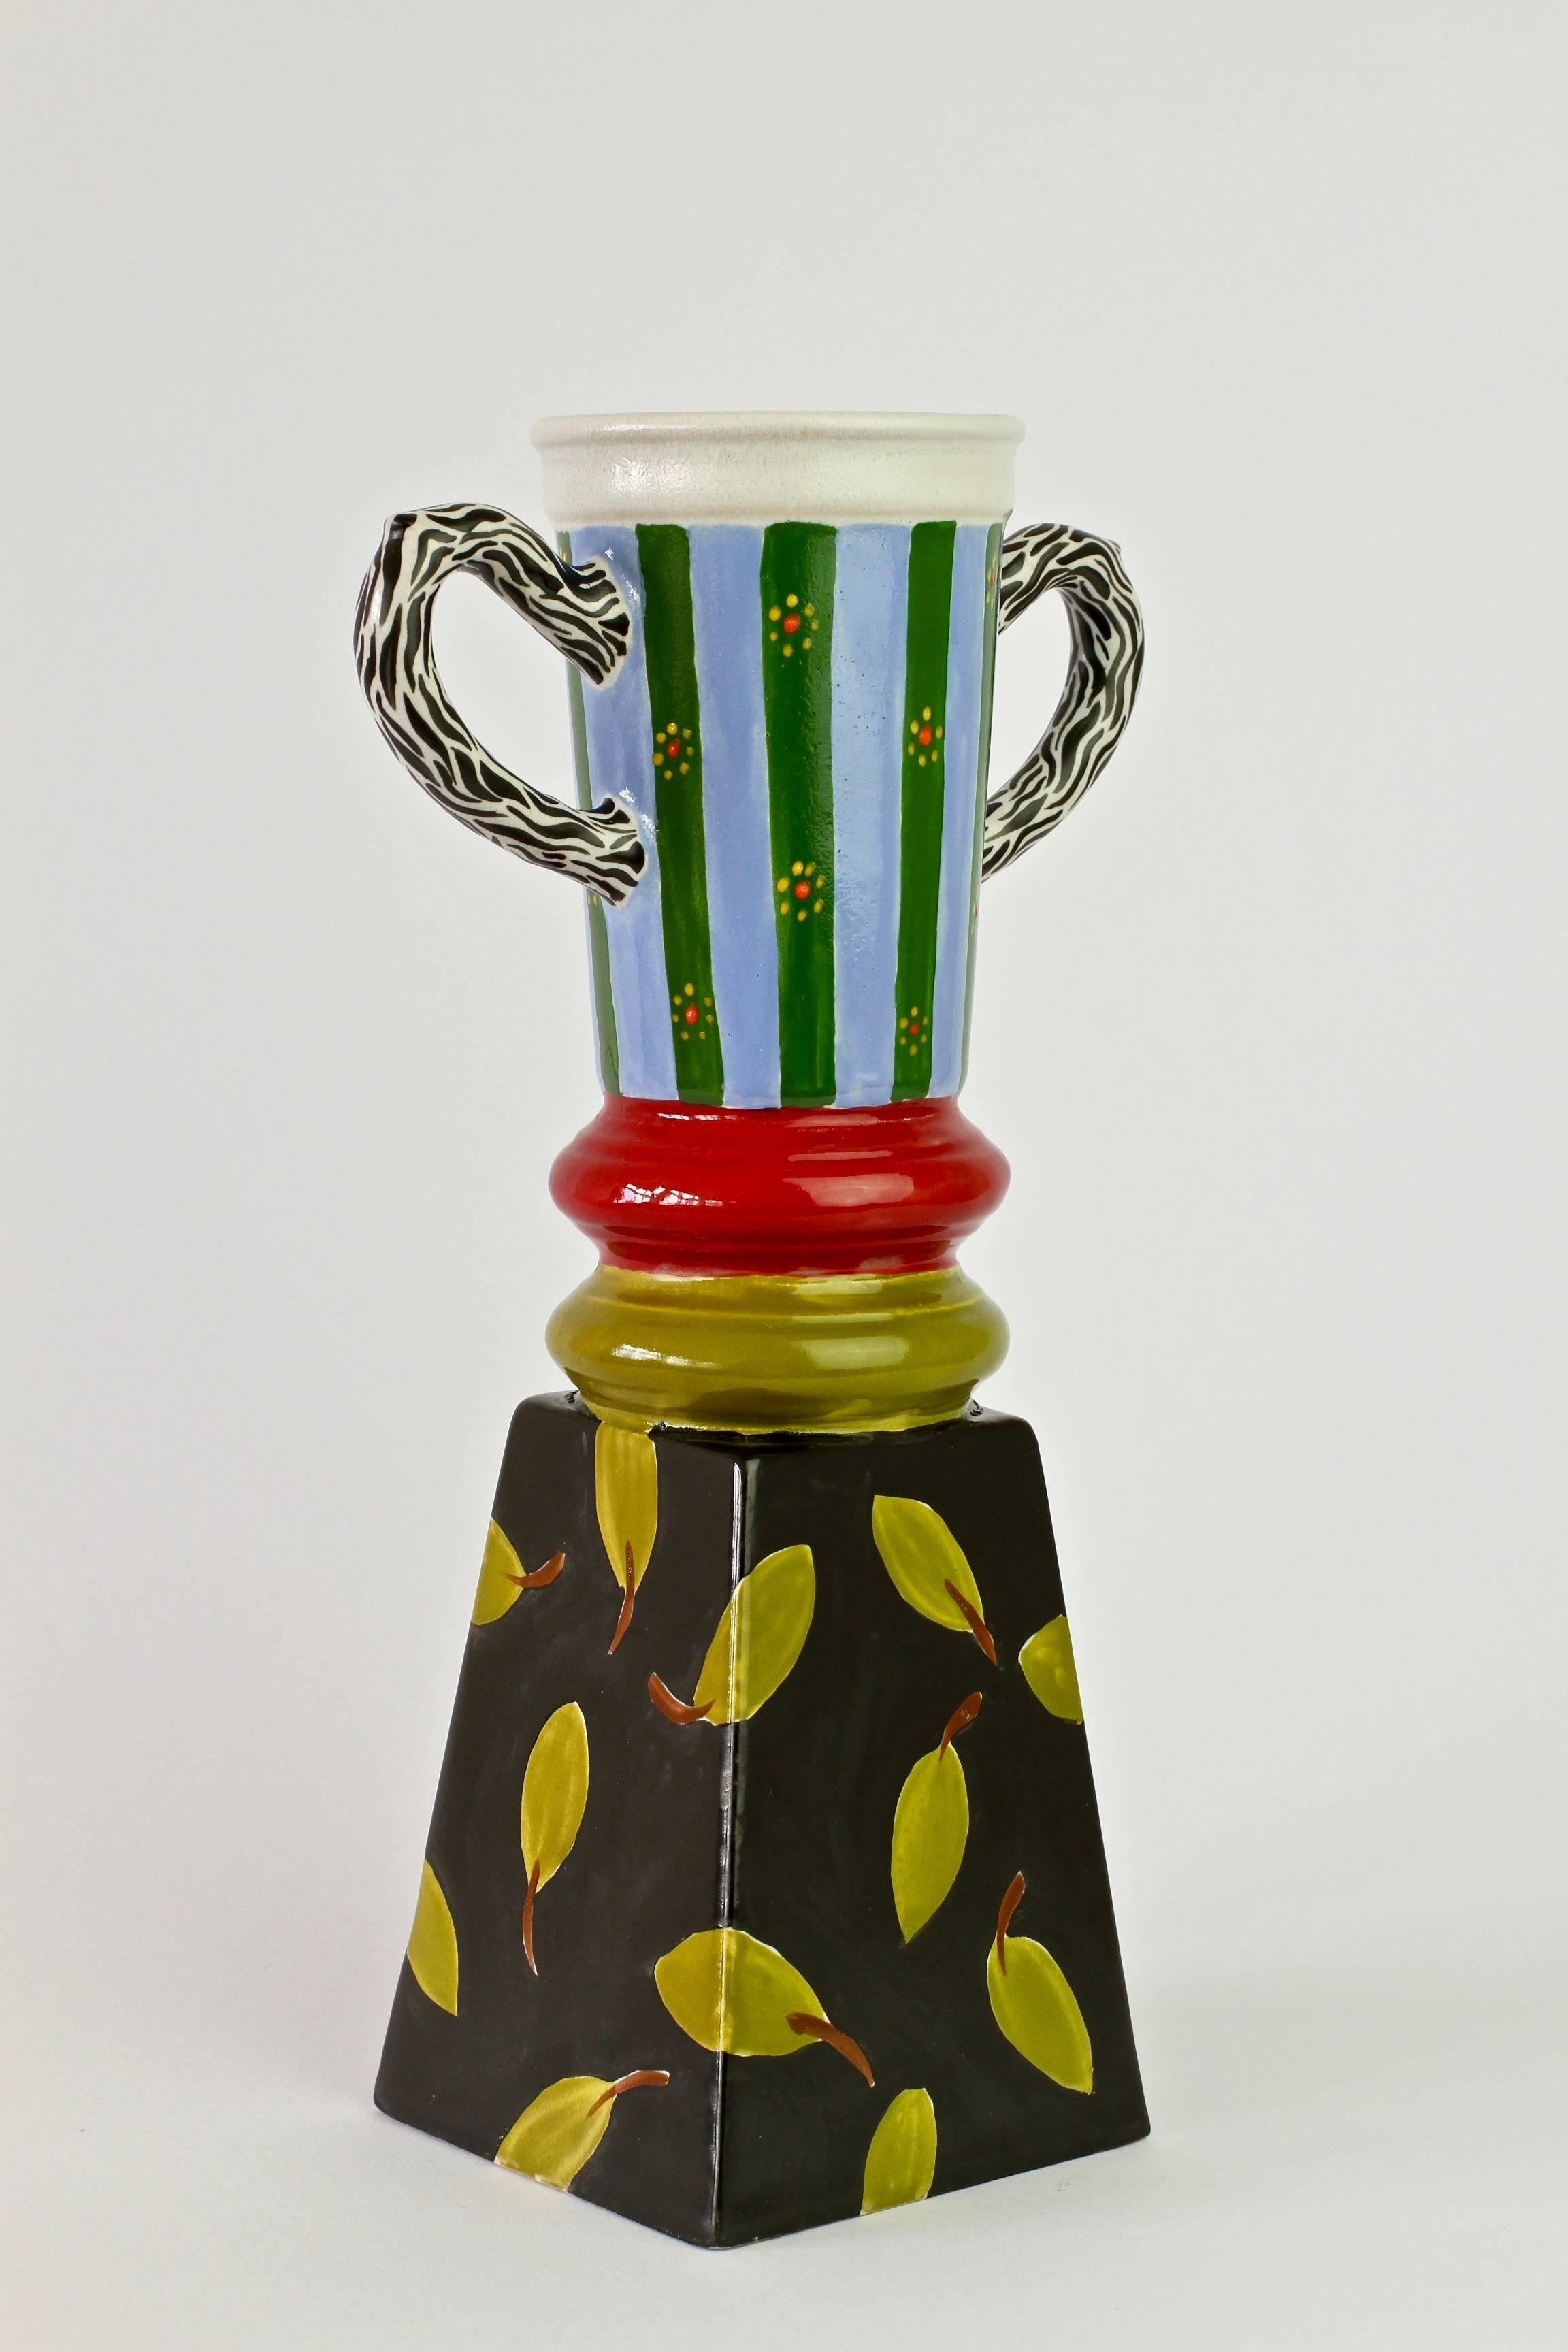 Signed Isabel Klingstein trophy, vase or vessel, circa 1982. A fun and brightly decorated piece very much reminiscent of the style of Italian designers, like Ettore Sottsass for the Memphis Group, in the 1980s.

Brightly decorated, whimsical and